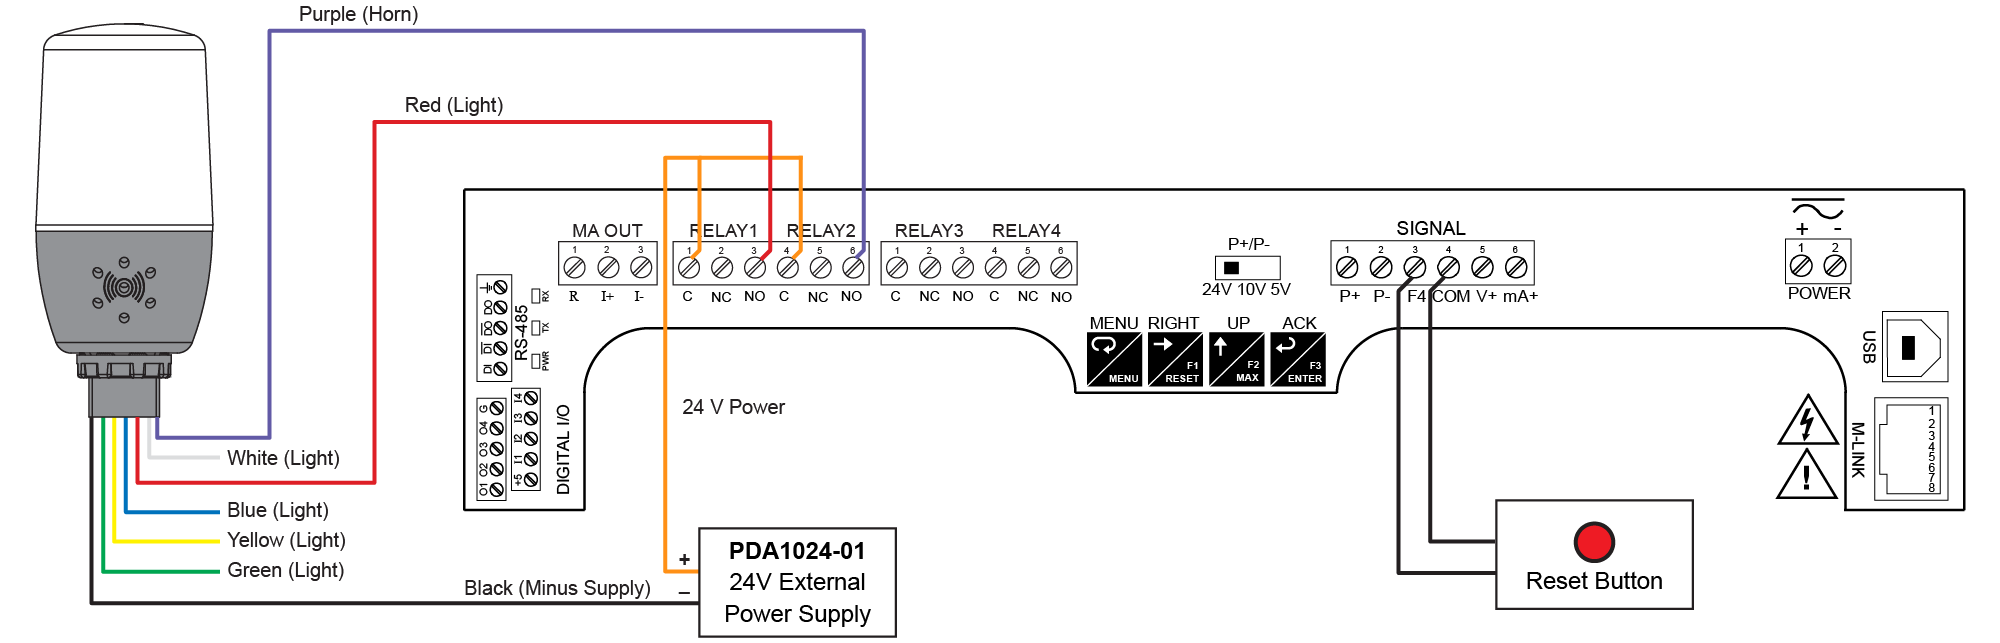 Wiring Connections for MOD-PD2LH5C Models Using PDA1024-01 External Power Supply